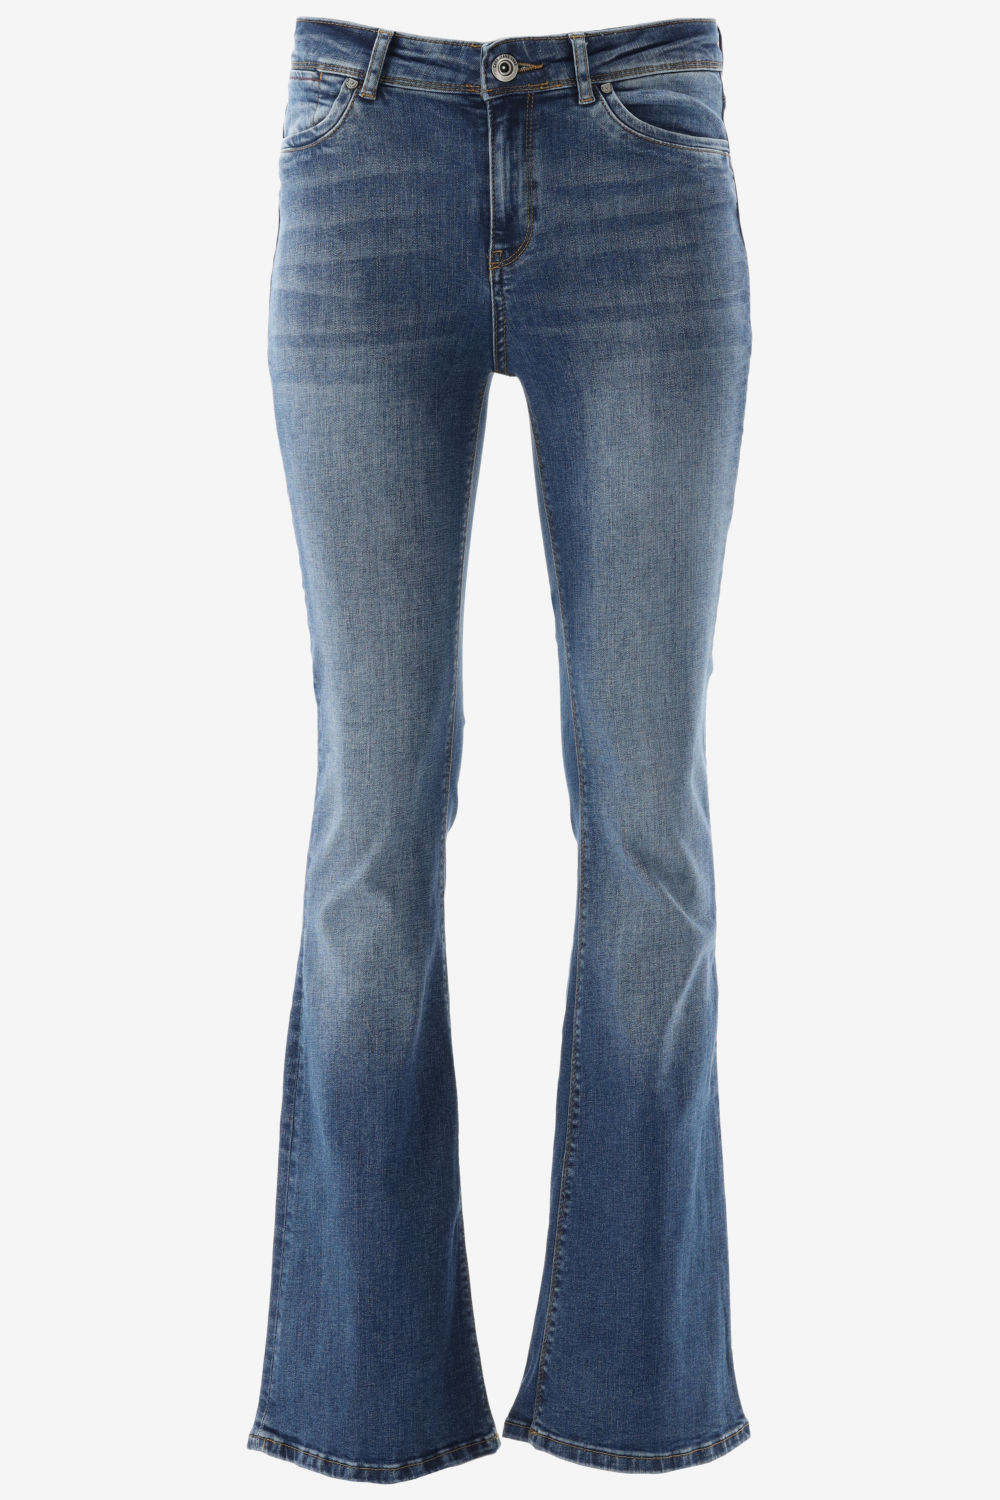 Cars Jeans Michelle Flare Den 78627 Stone Used Dames Maat - W30 X L30